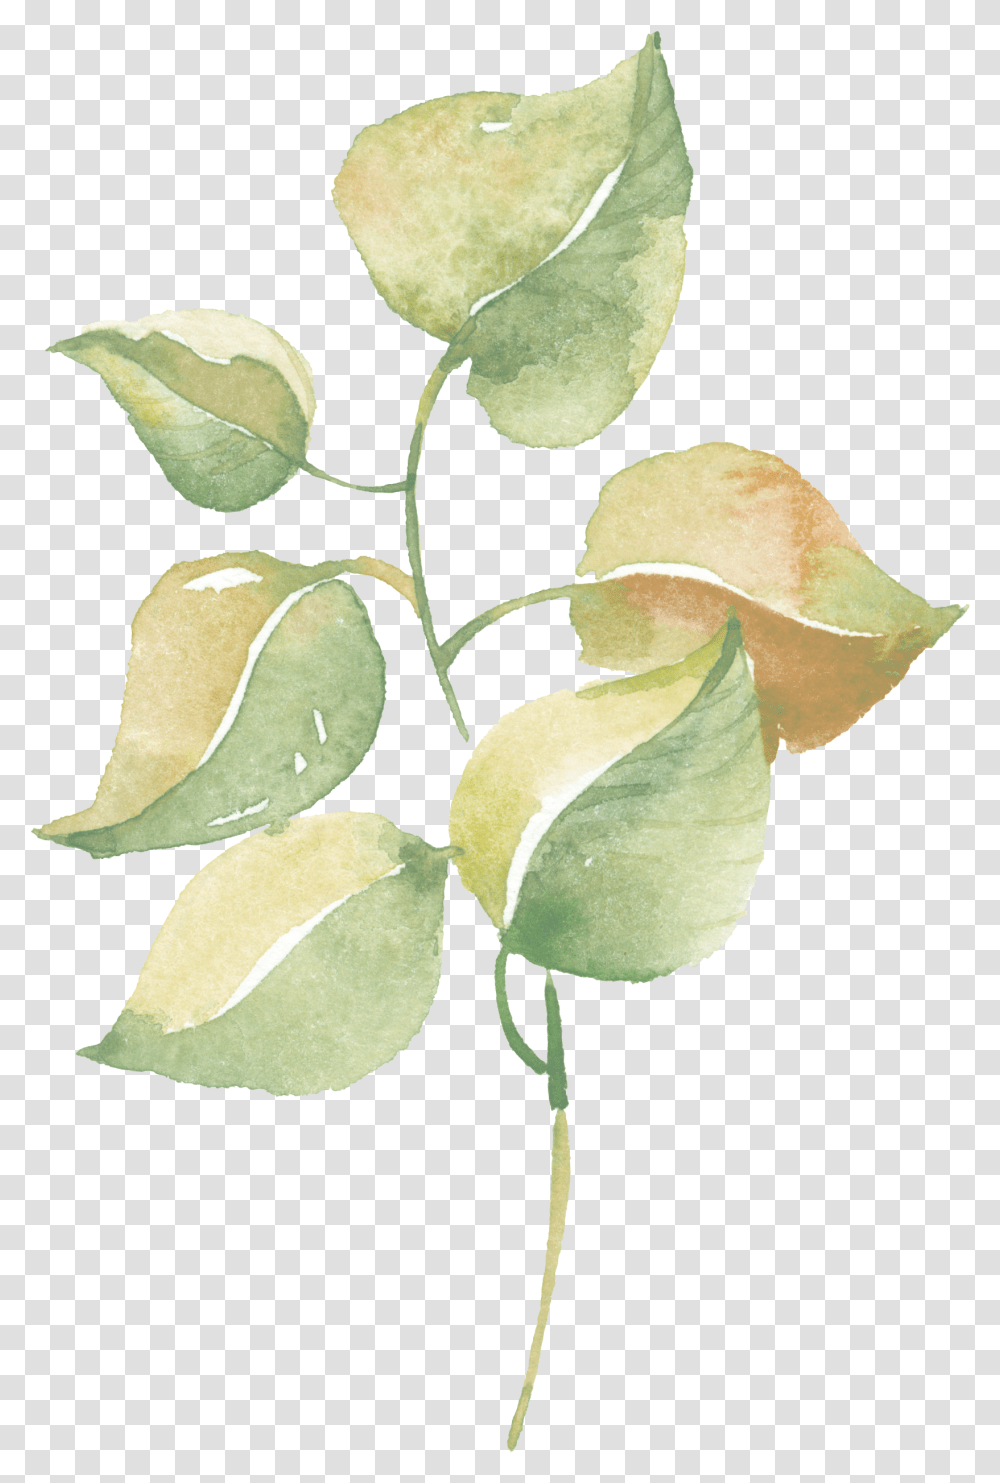 Watercolor Greenery Vector Download Greenery Watercolor Background, Plant, Leaf, Annonaceae, Tree Transparent Png